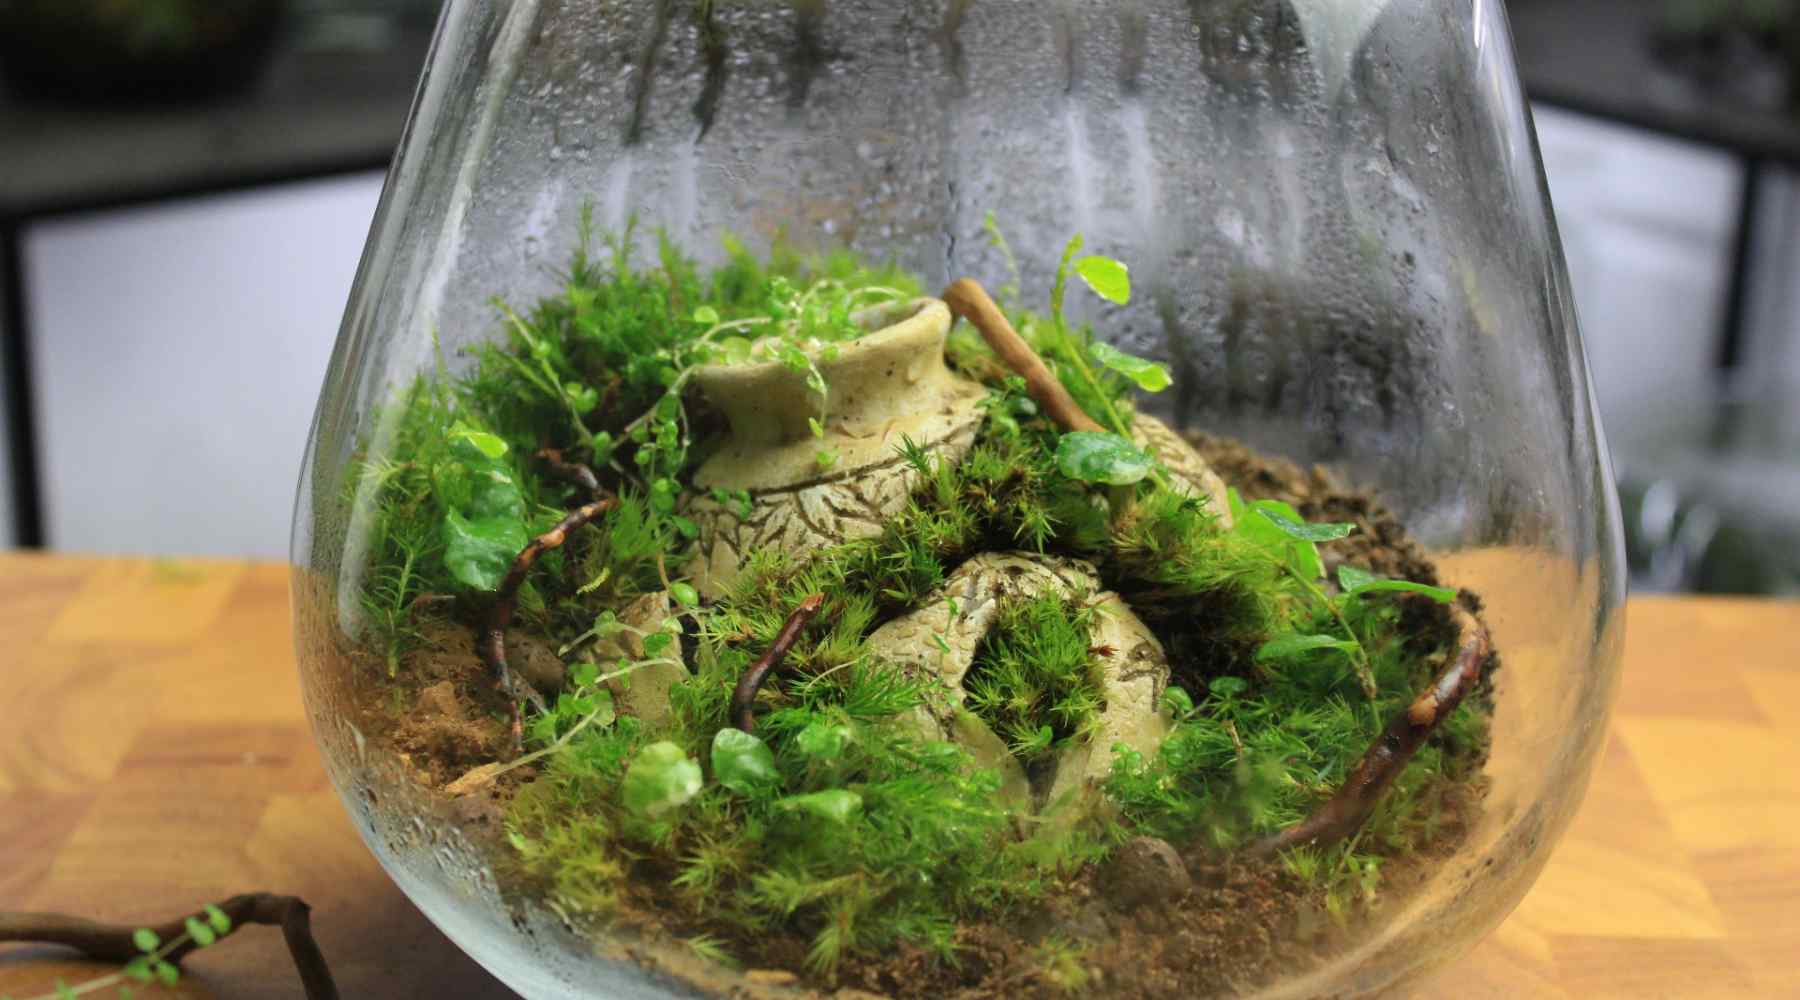 DIY Small Closed Terrarium Starter Kit With 2 Humidity Loving Plants  Included Soil, Sphagnum Moss, Charcoal, Pebbles, Bark 